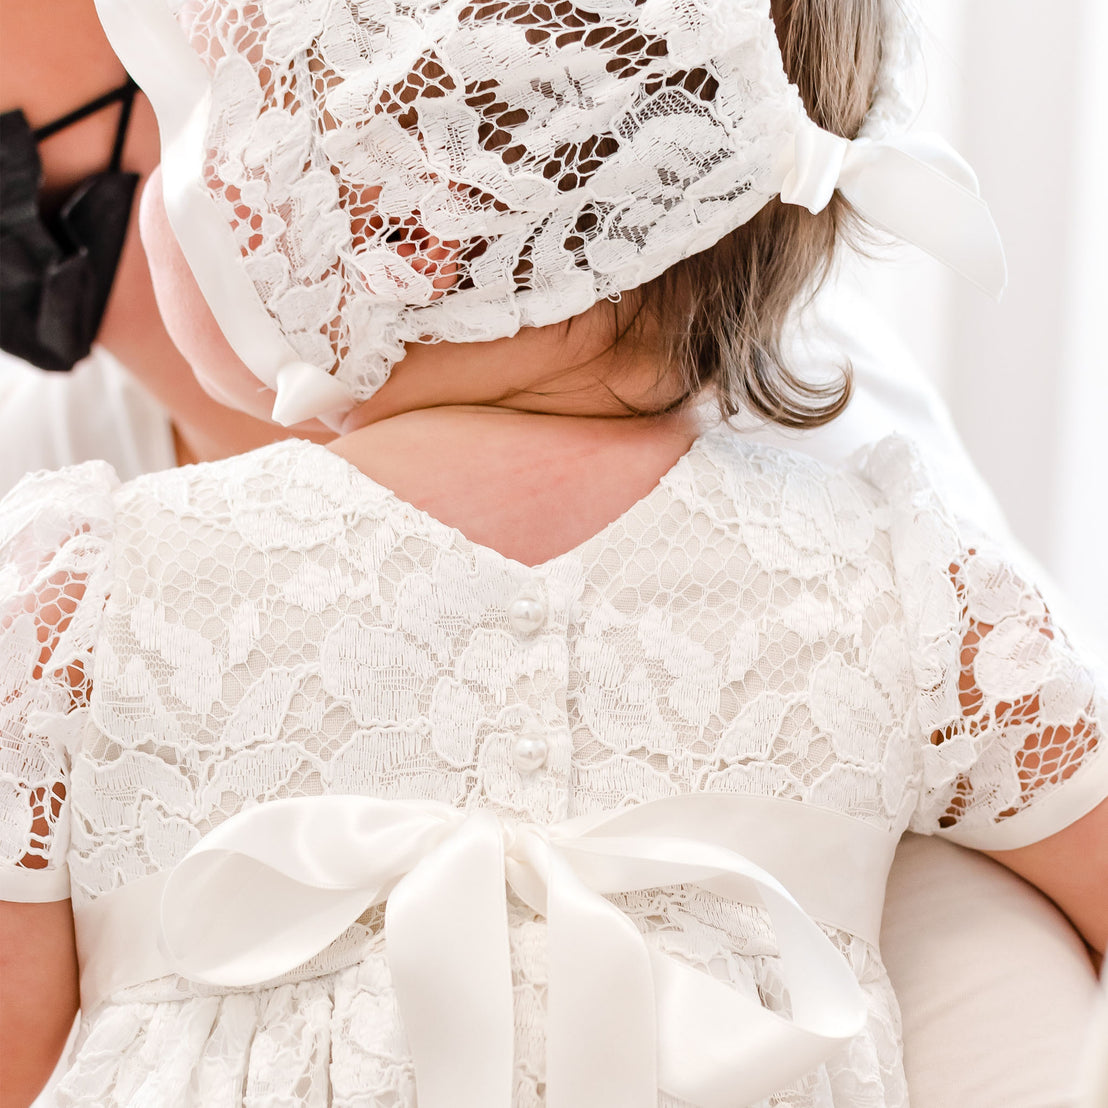 Close-up of a baby wearing the Rose Christening Gown & Bonnet, viewed from behind at a baptism. The baby is held by an adult.